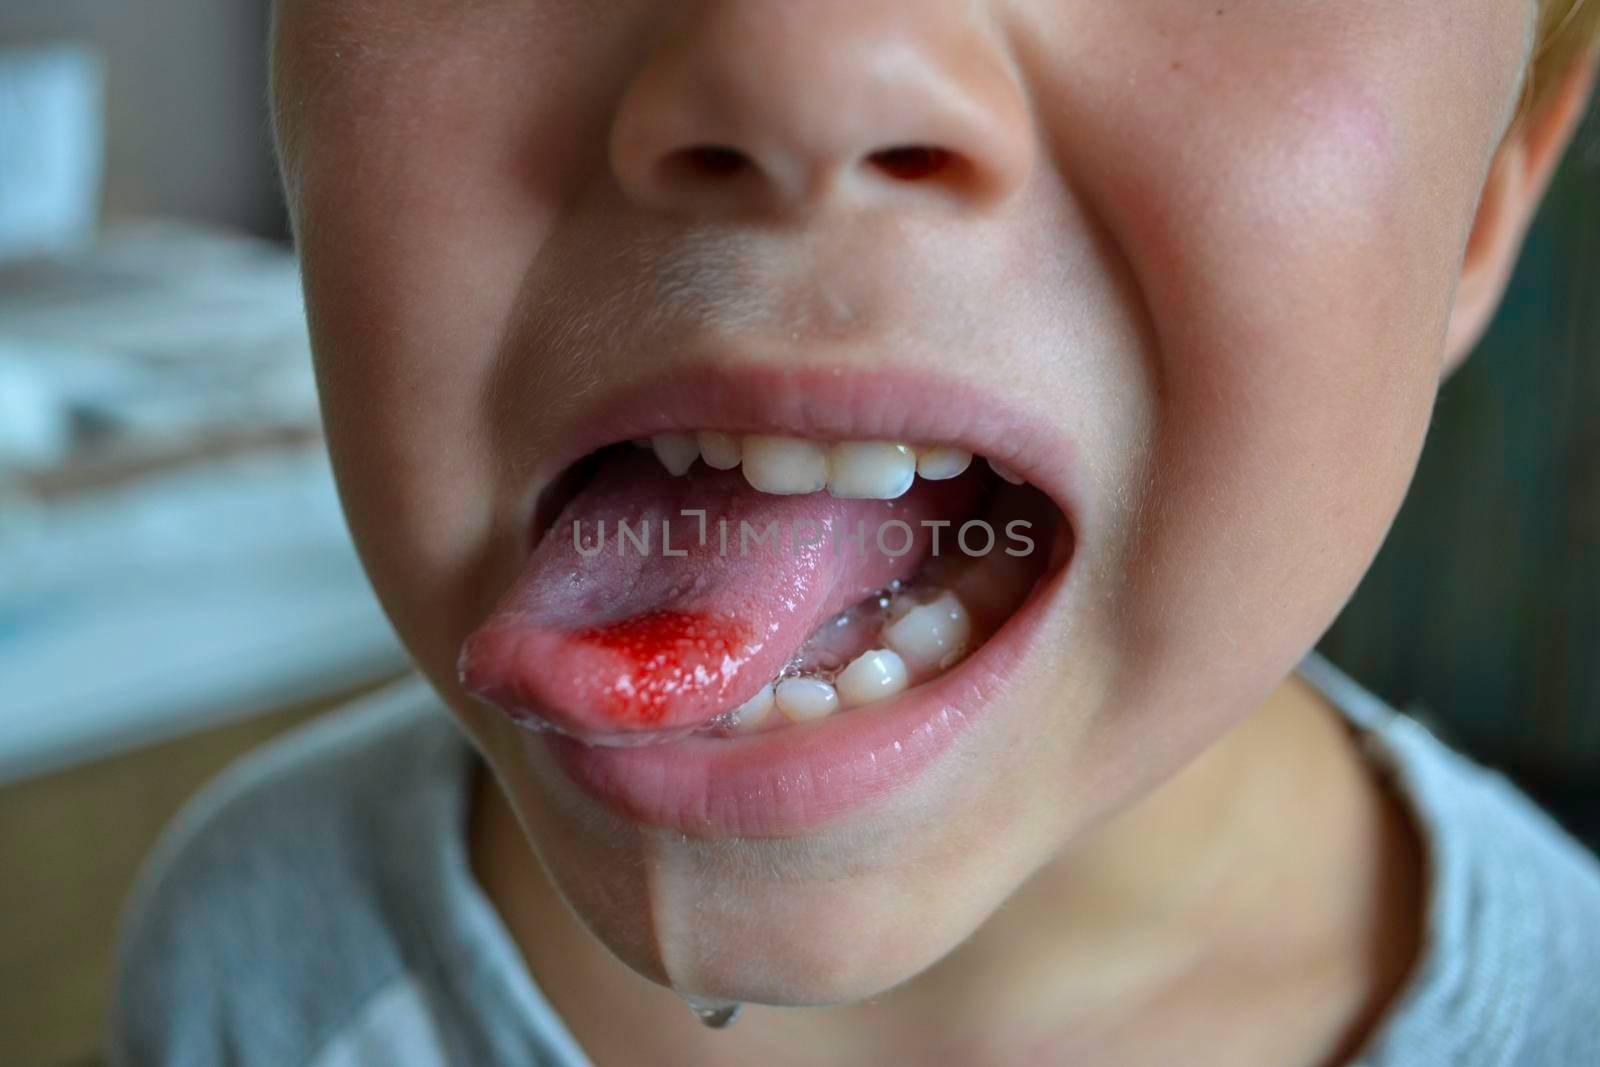 Close-up of lips, tongue, protrusion of blood. Child's bitten tongue. High quality photo